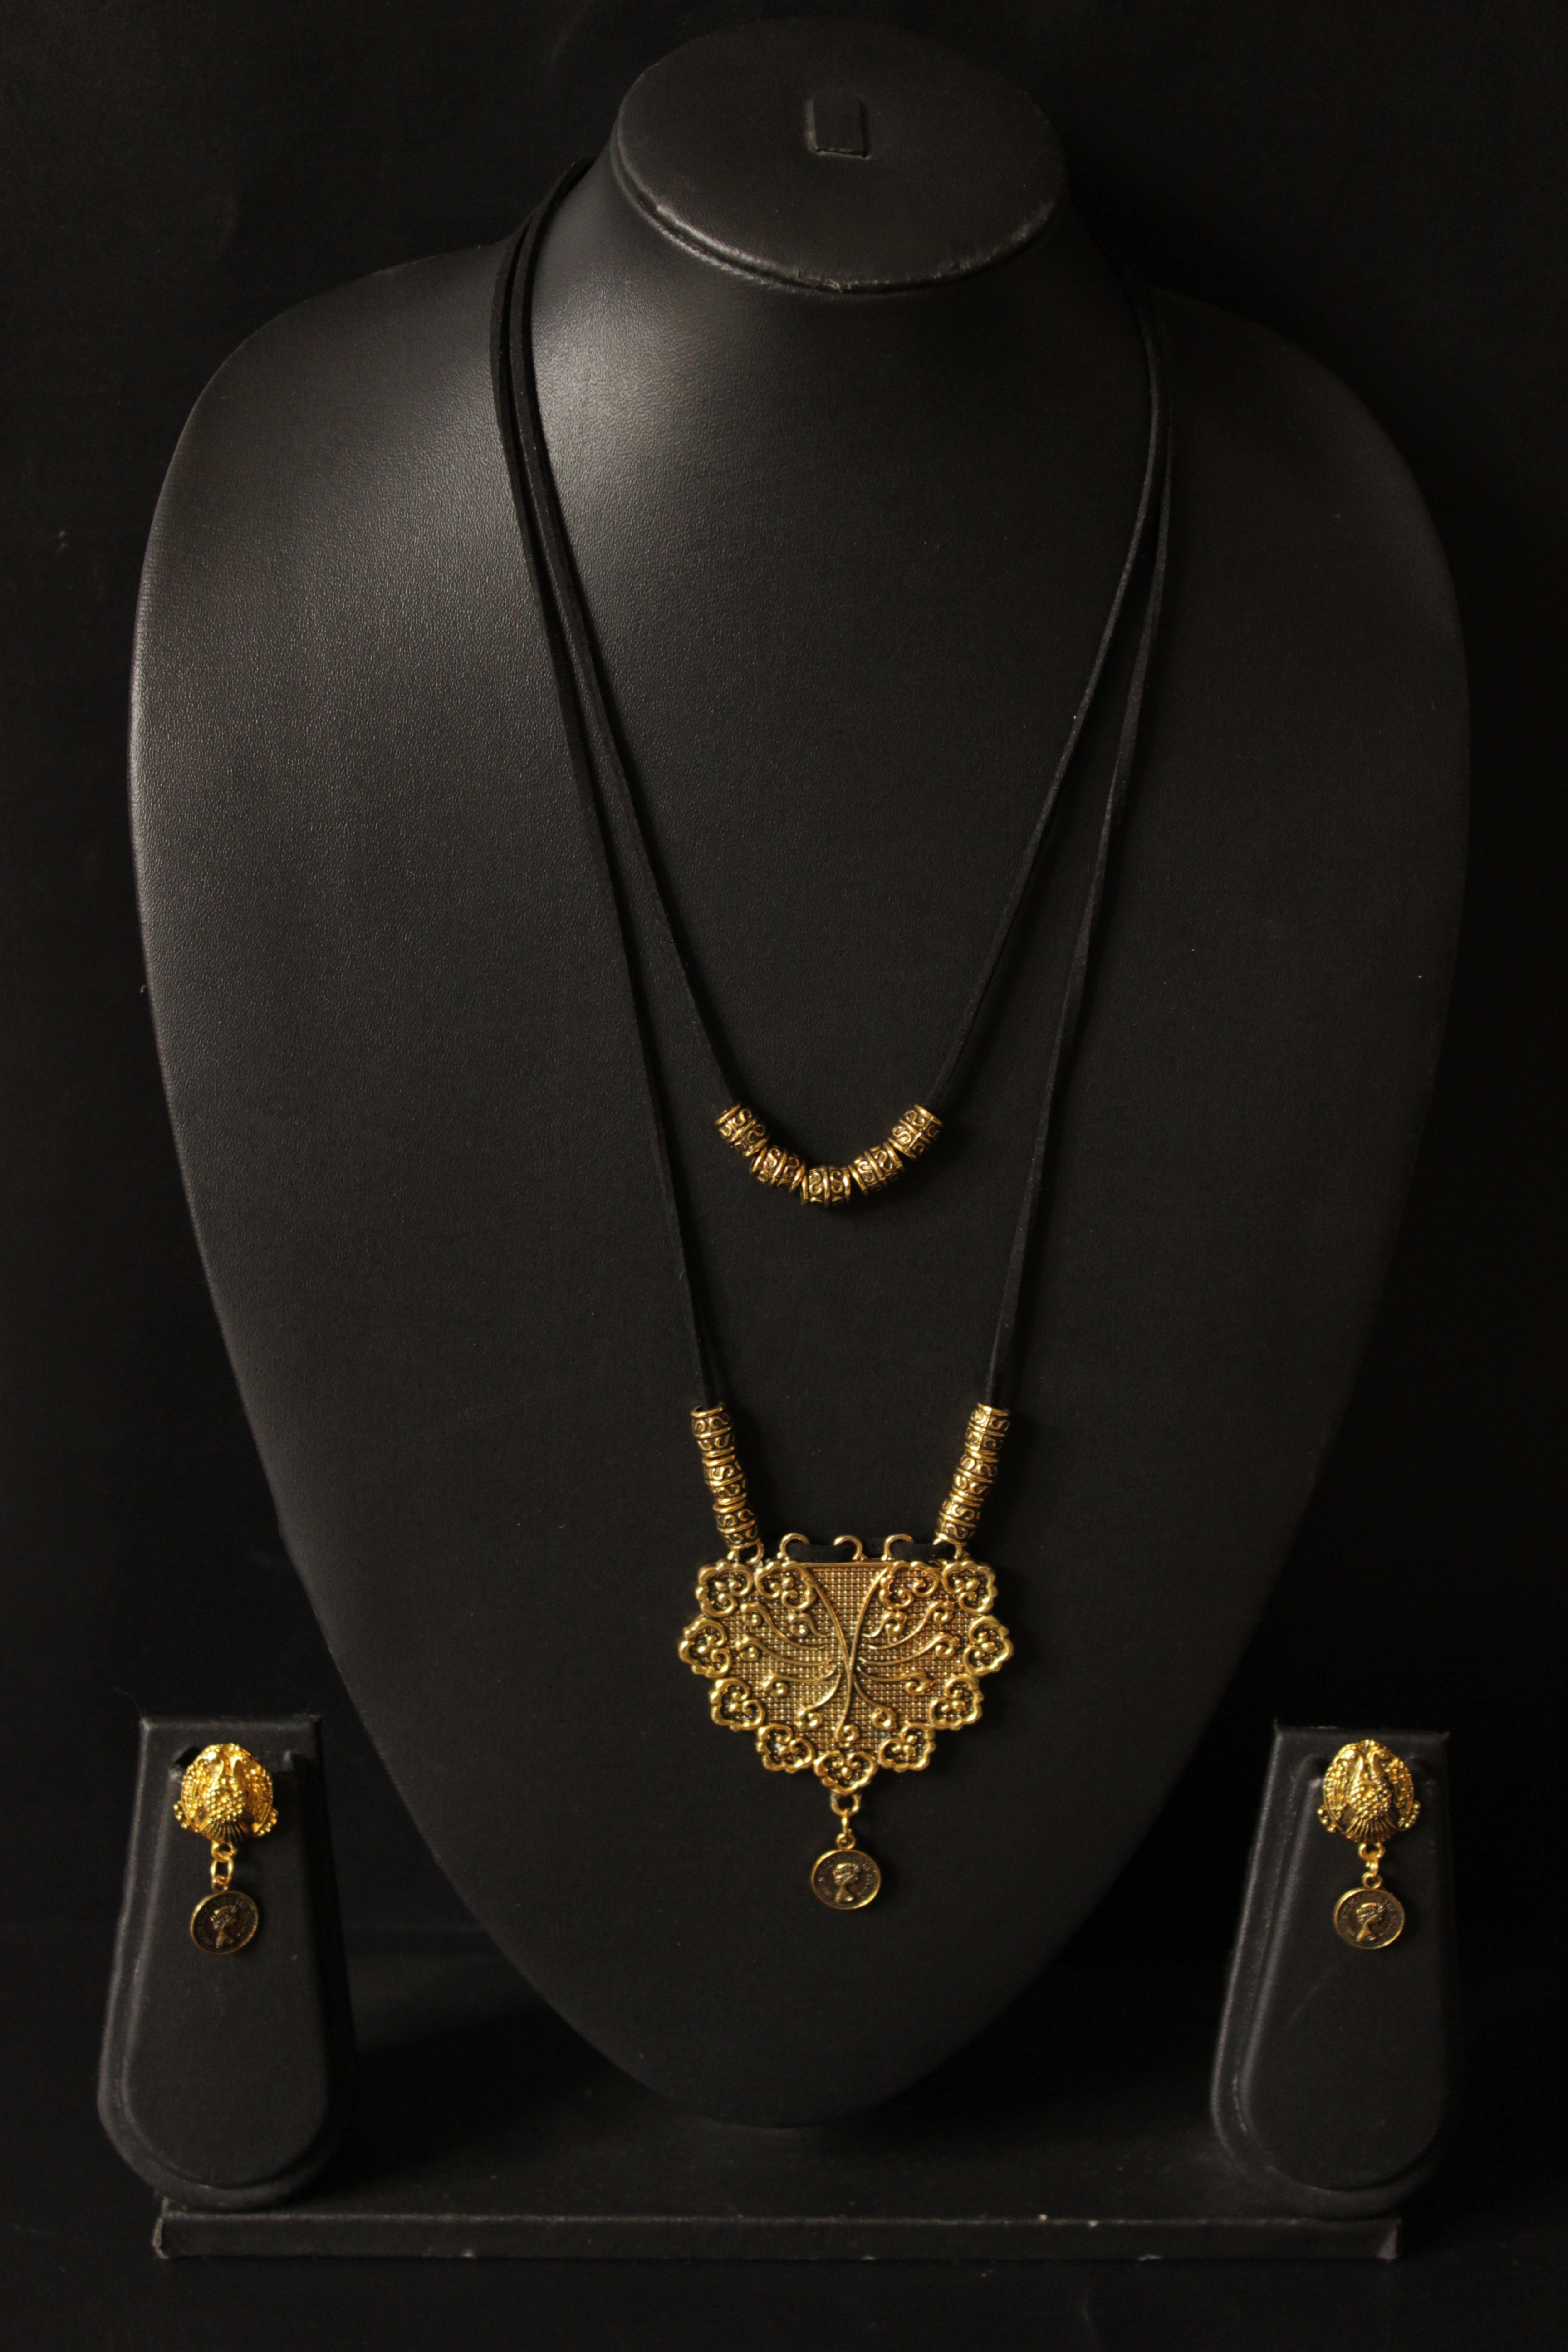 2 Layer Antique Gold Finish Rope Closure Necklace Set